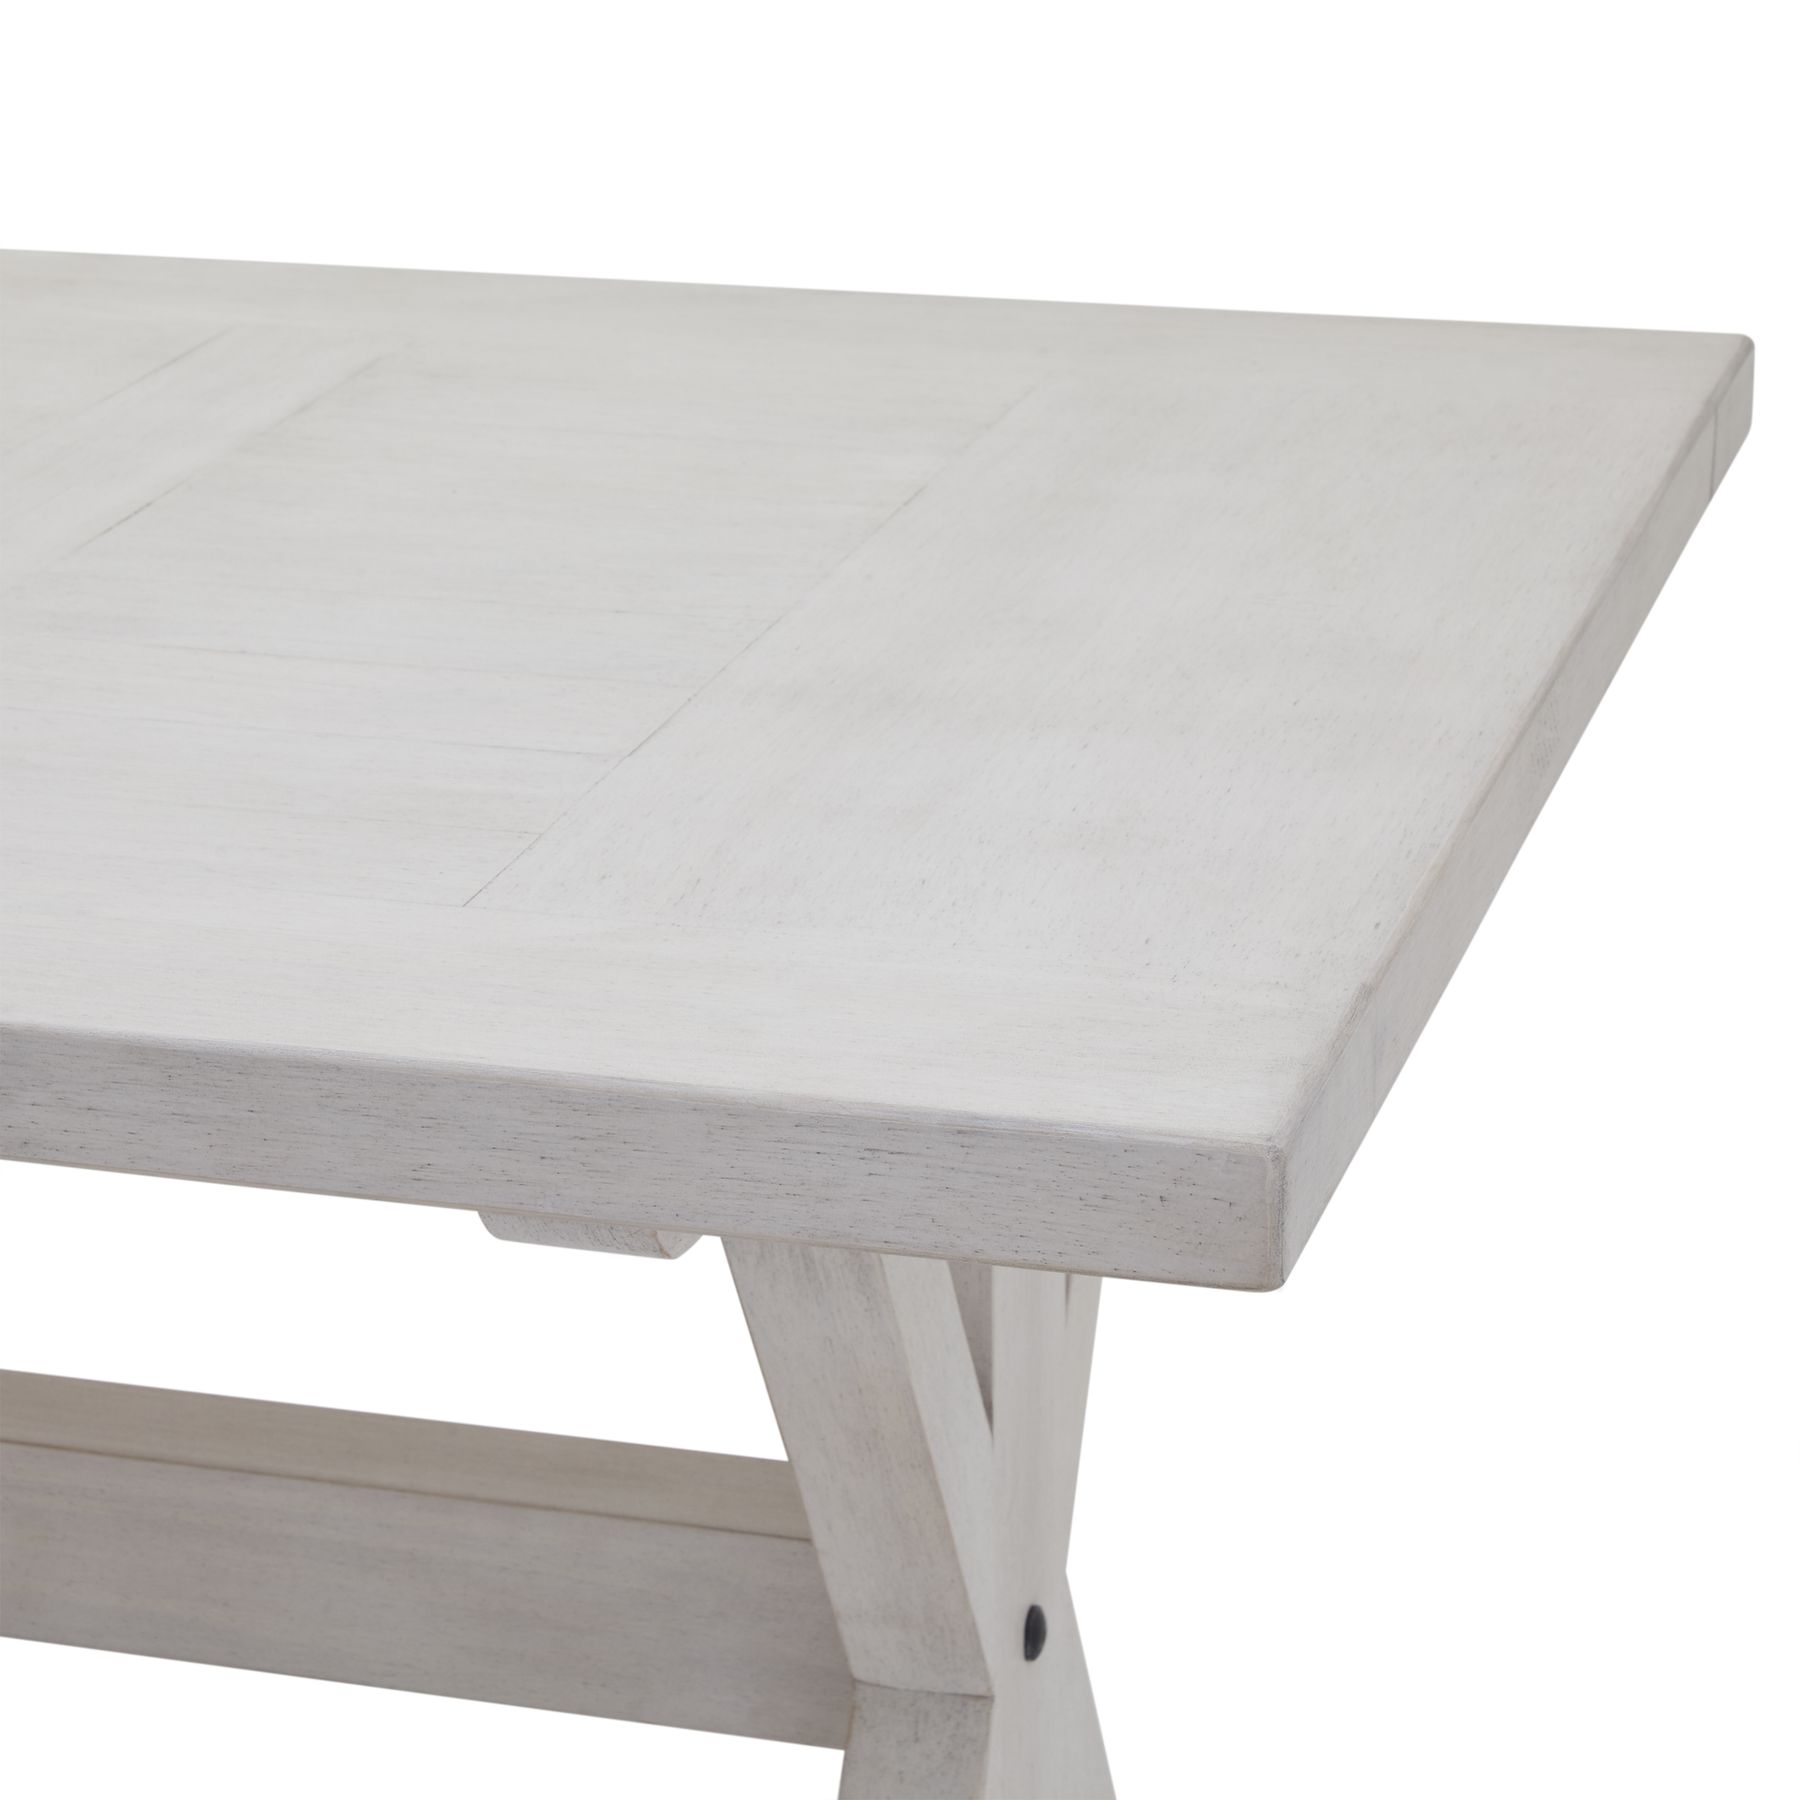 Stamford Plank Collection Dining Table - Image 2